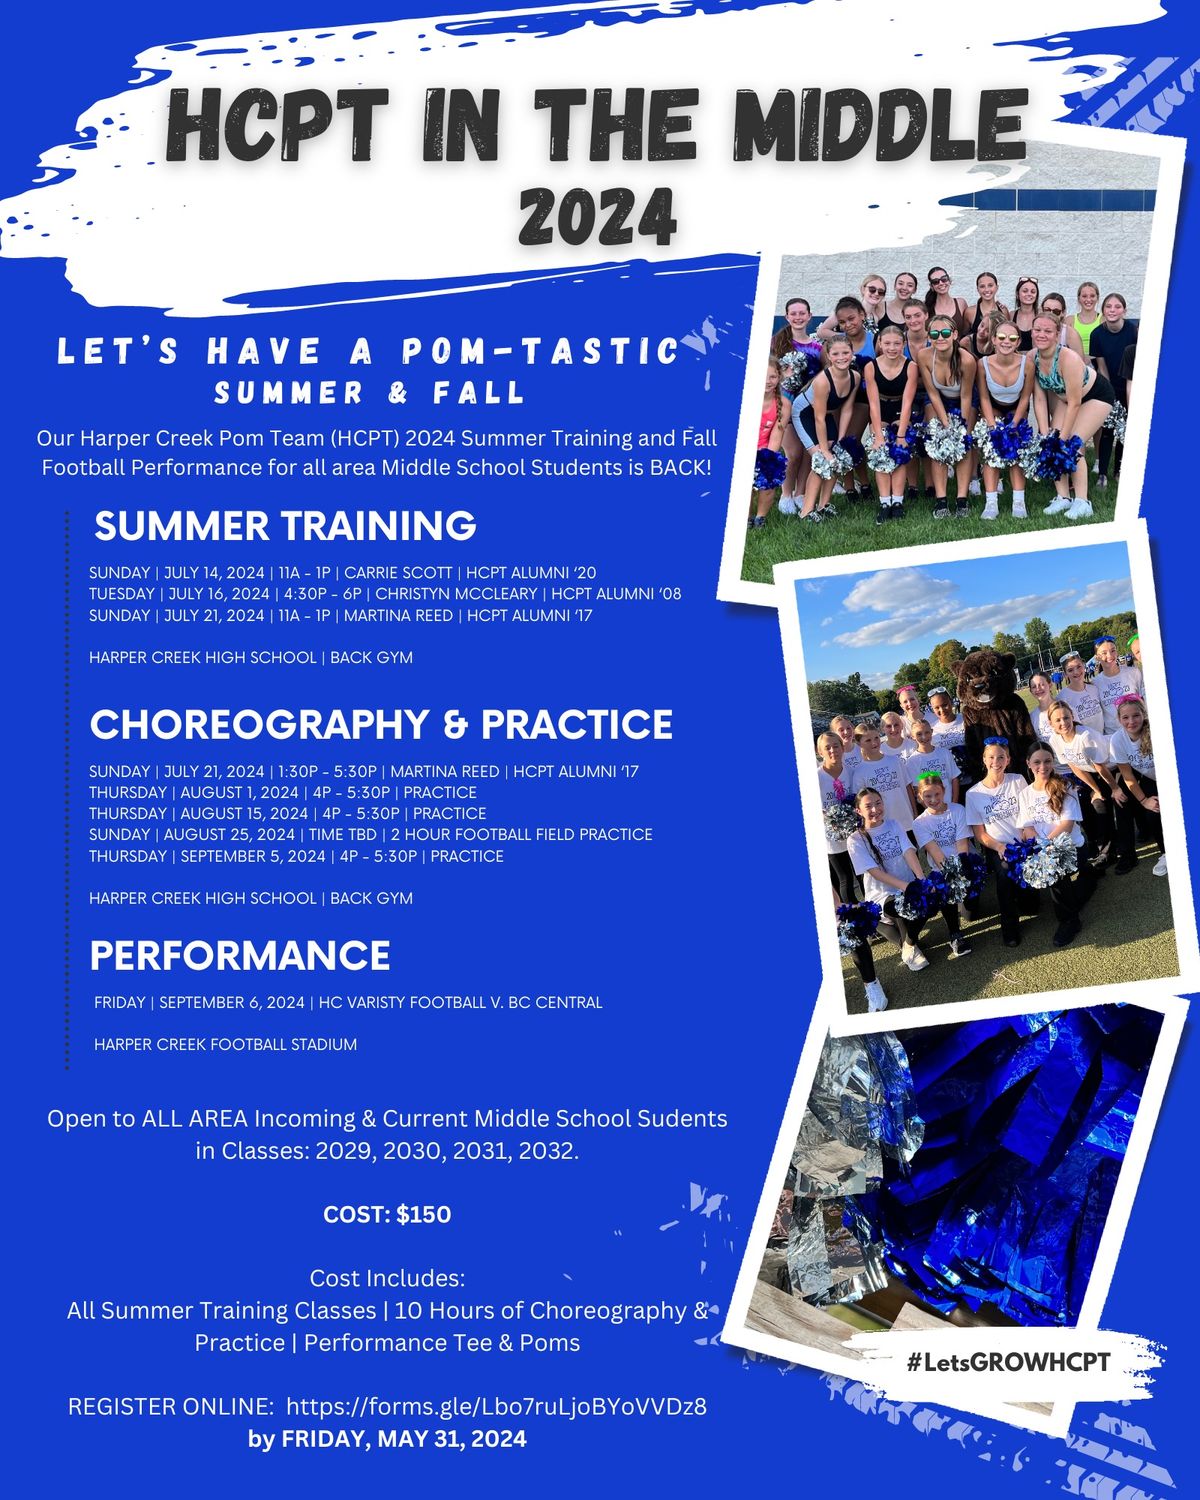 HCPT in the Middle | 2024 | Summer Training & Choreography | Martina Reed  | HCPT Alumni \u201817